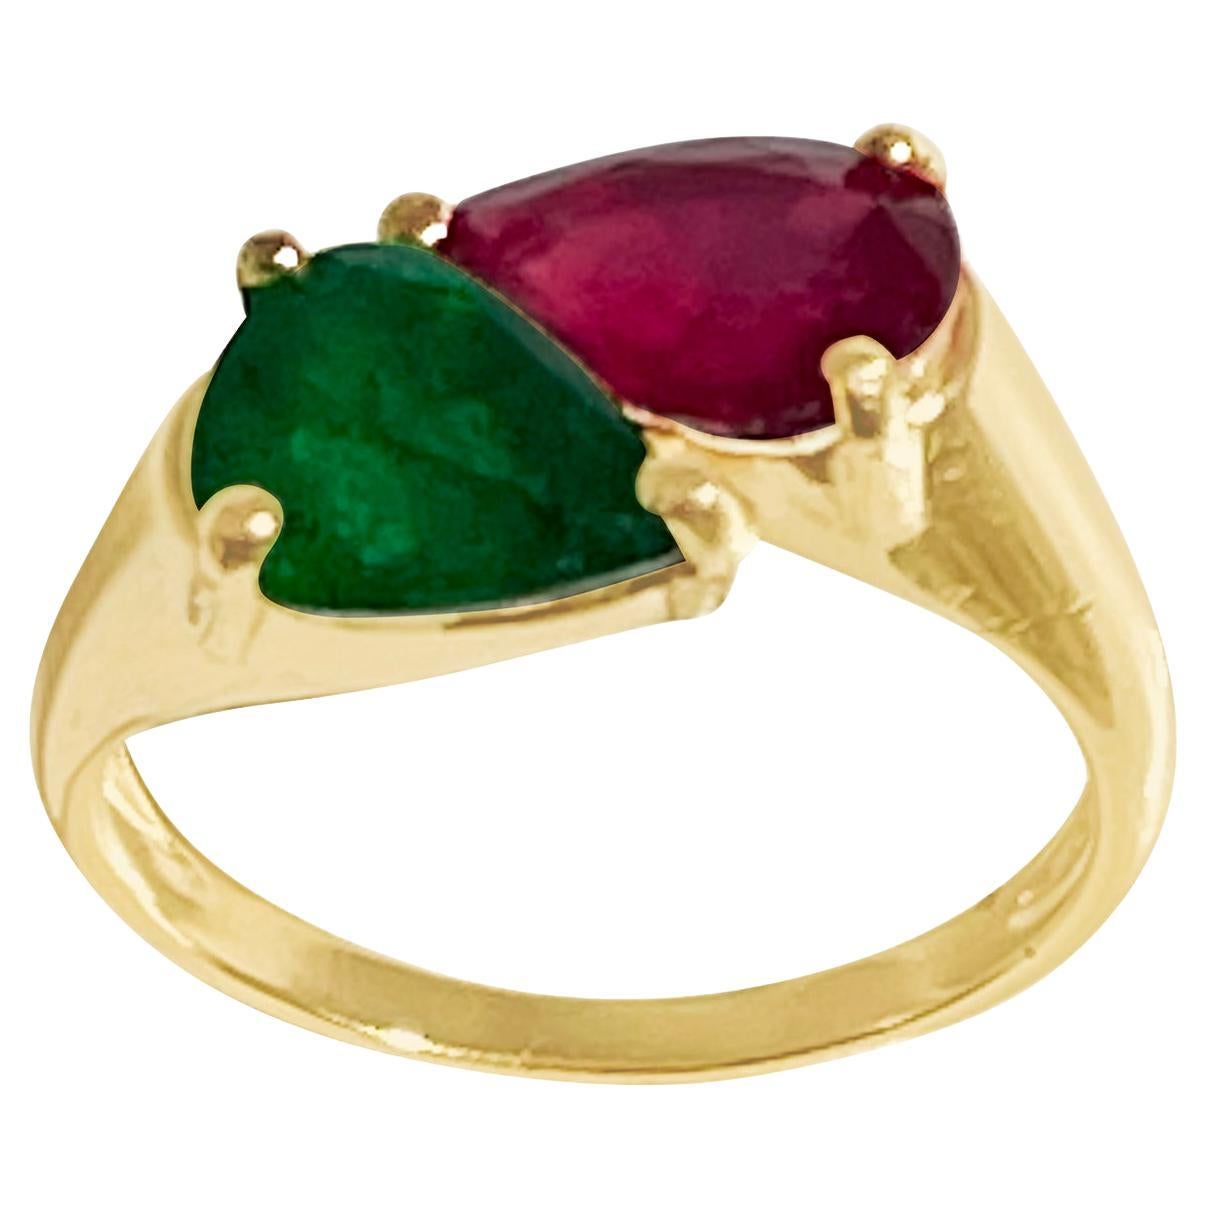 Pear Shape Emerald and Ruby Engagement Ring in 14 Karat Gold